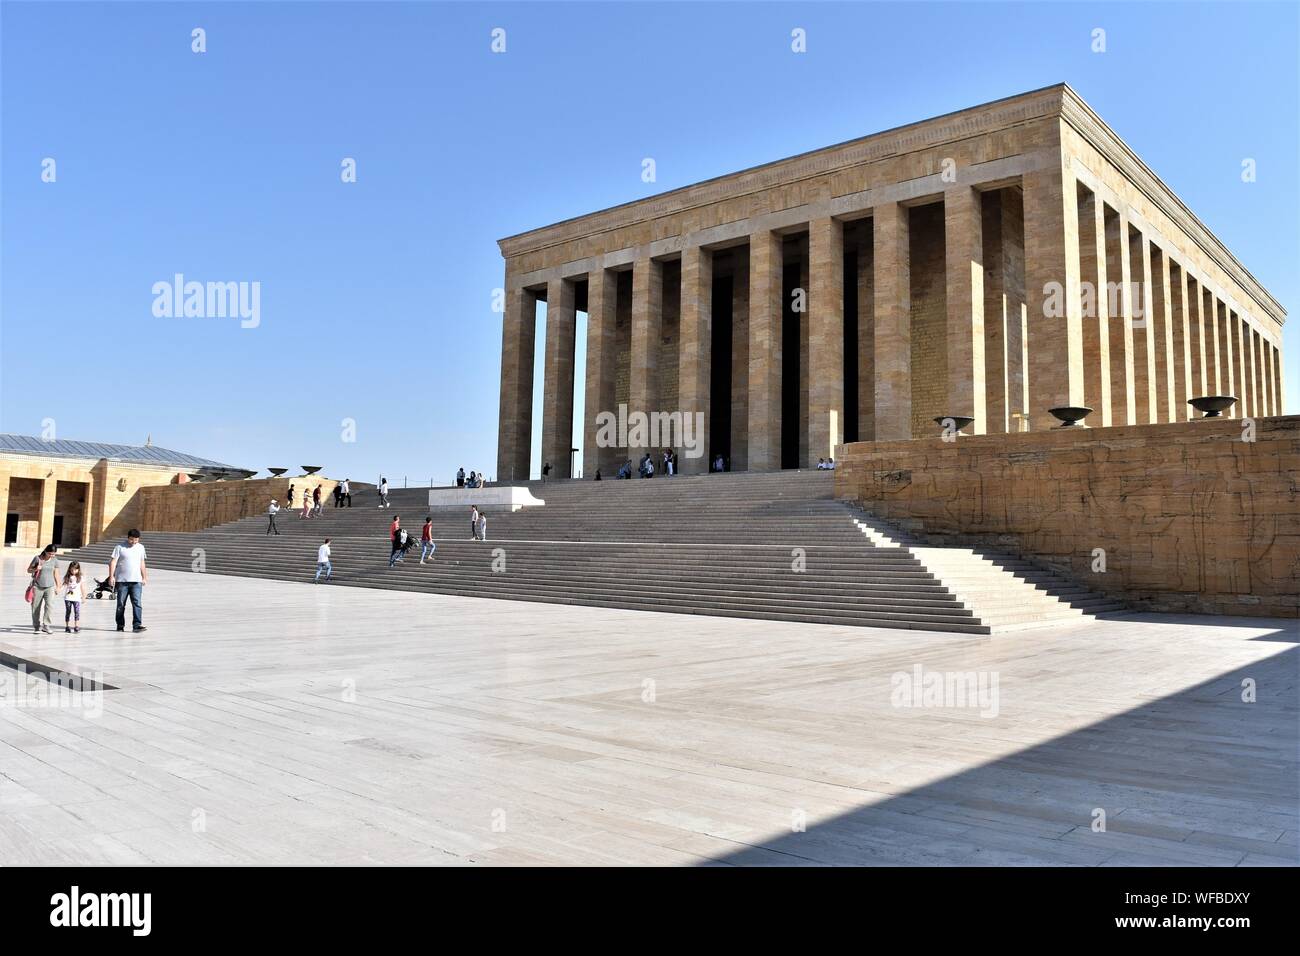 Ankara, Turkey. 31st Aug, 2019. People visit Anitkabir, the mausoleum of modern Turkey's founder Mustafa Kemal Ataturk, a day after the 97th anniversary of Victory Day, which commemorates the defeat of the Greek forces at the hands of the Turks in the Battle of Dumlupinar in 1922. Credit: Altan Gocher/ZUMA Wire/Alamy Live News Stock Photo